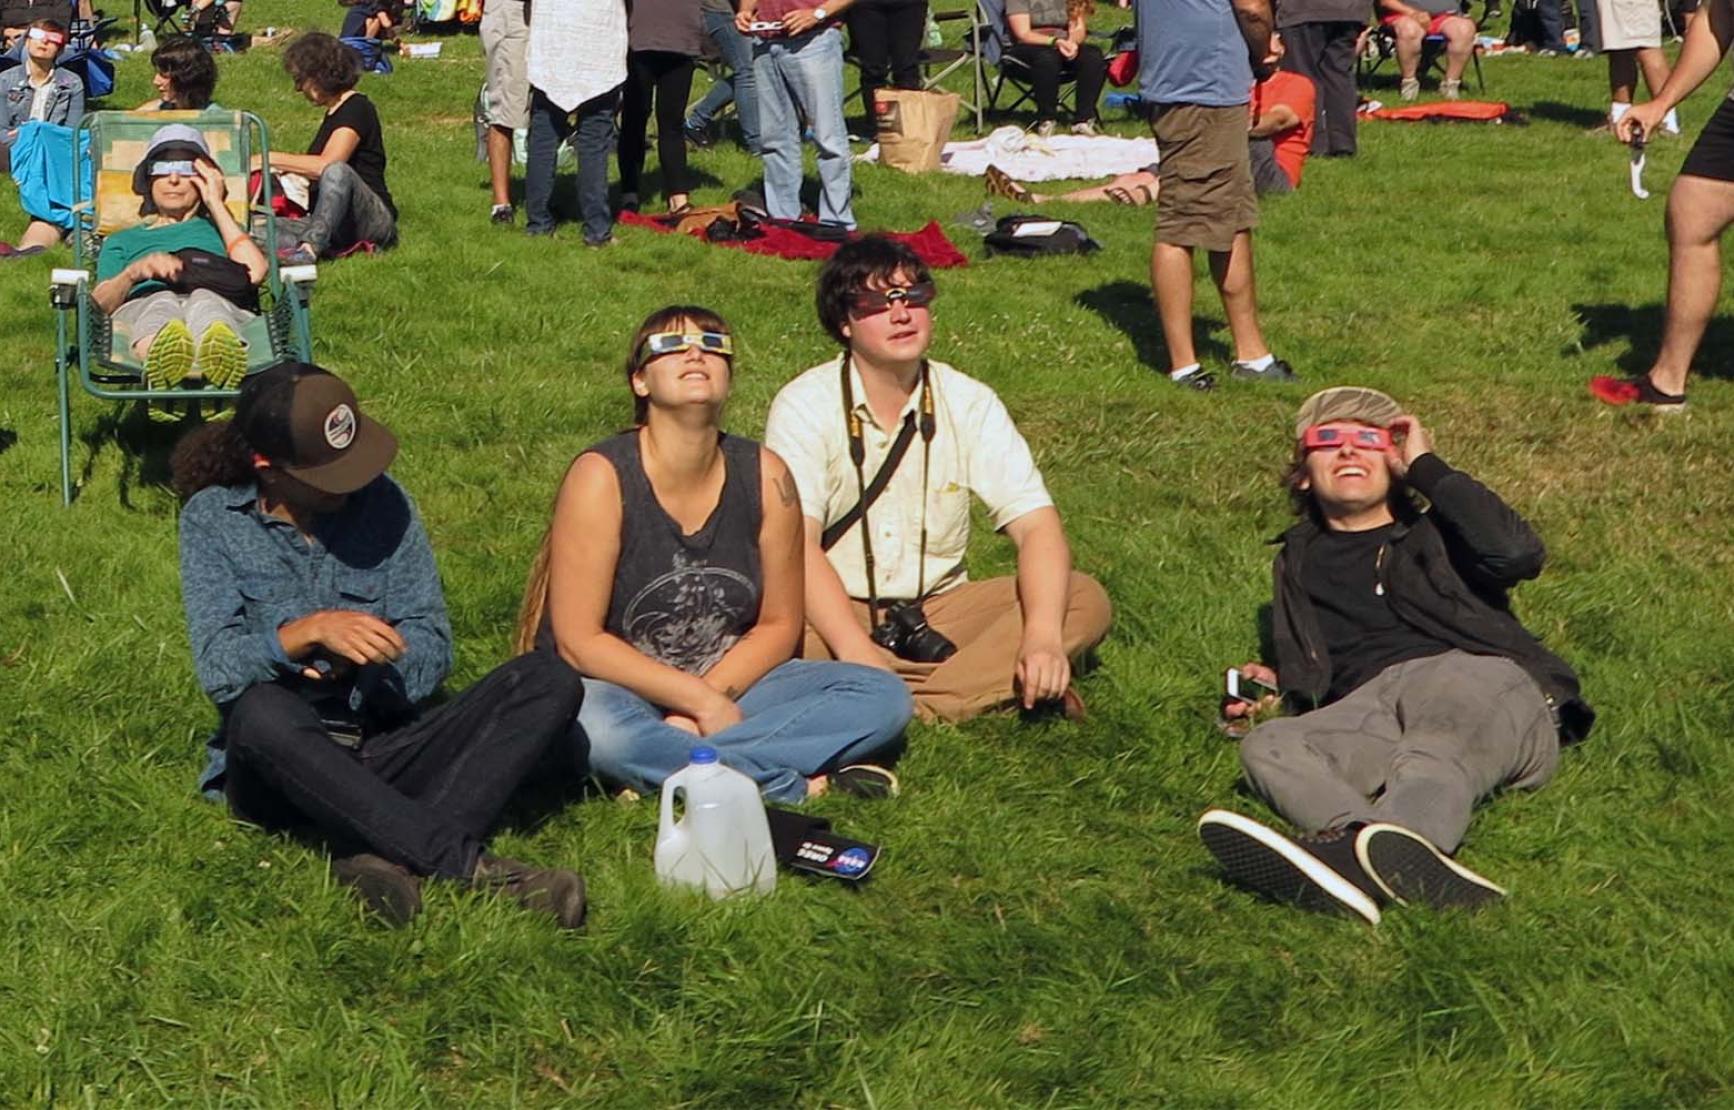 People gathered in a field for the 2017 eclipse.